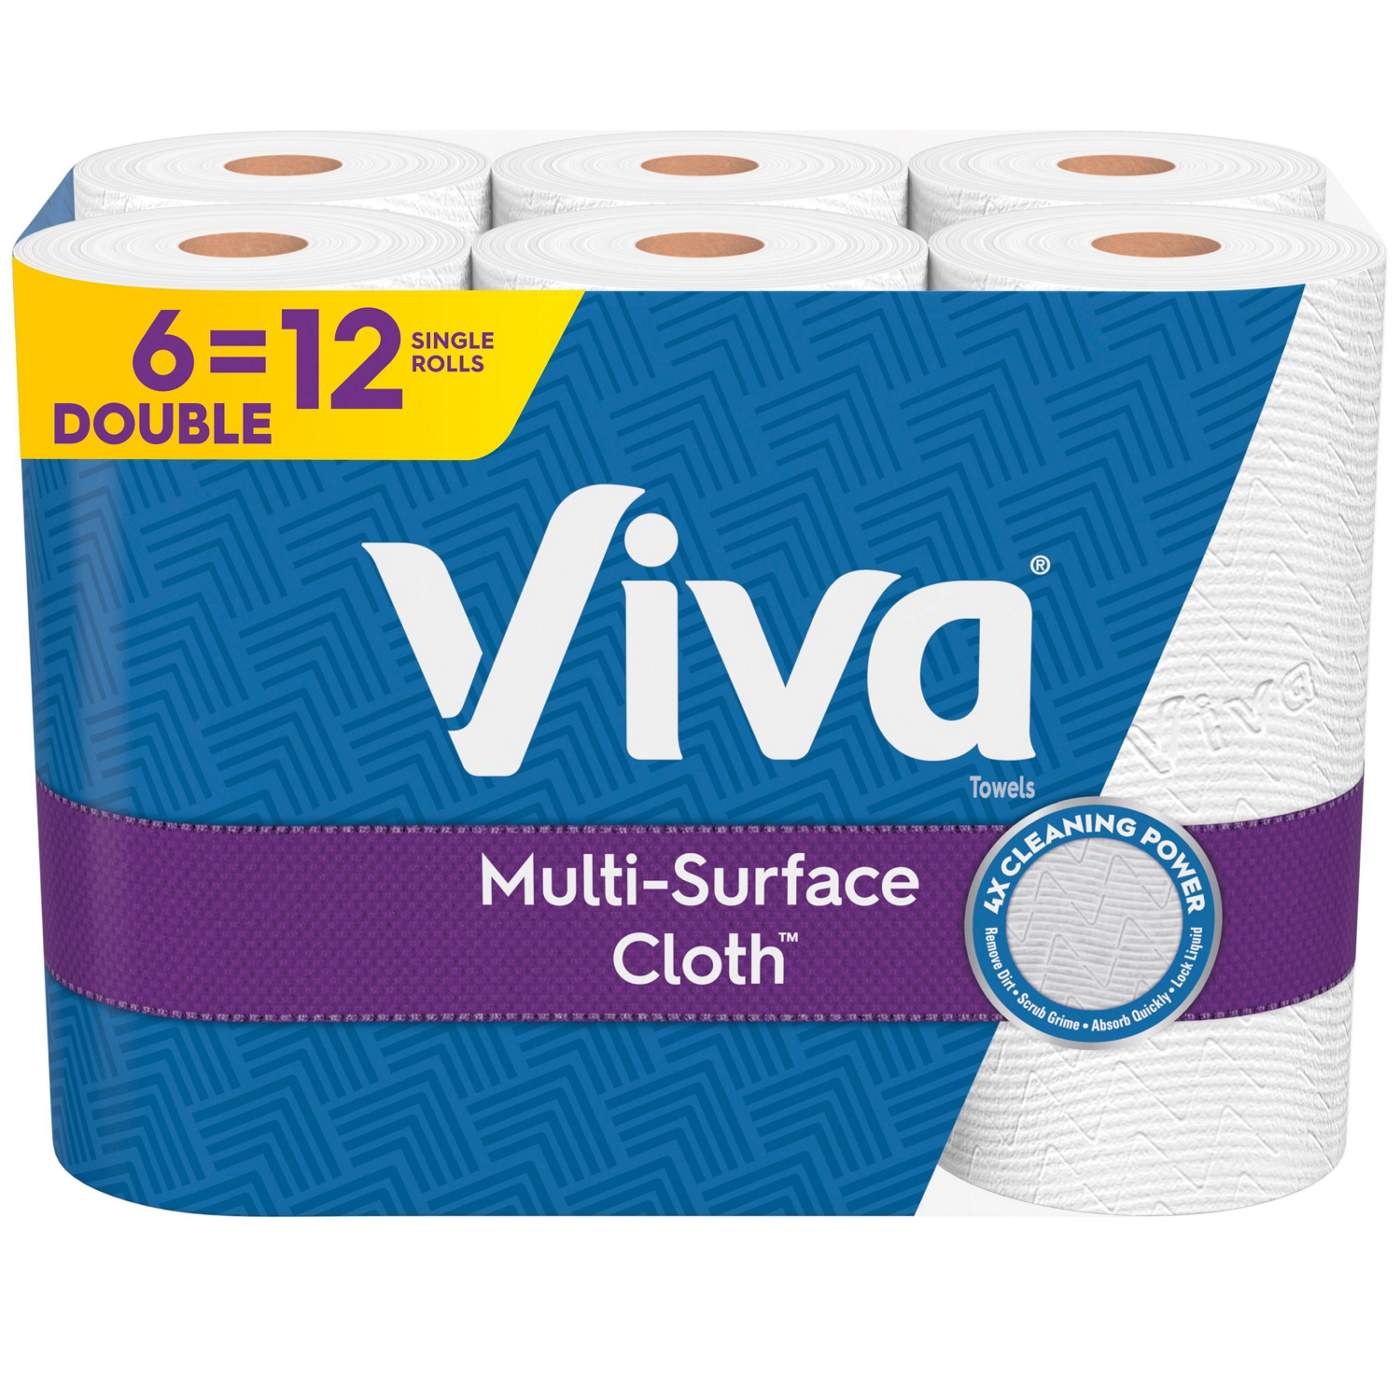 Viva Multi-Surface Cloth Choose-A-Sheet Double Roll Paper Towels; image 1 of 8